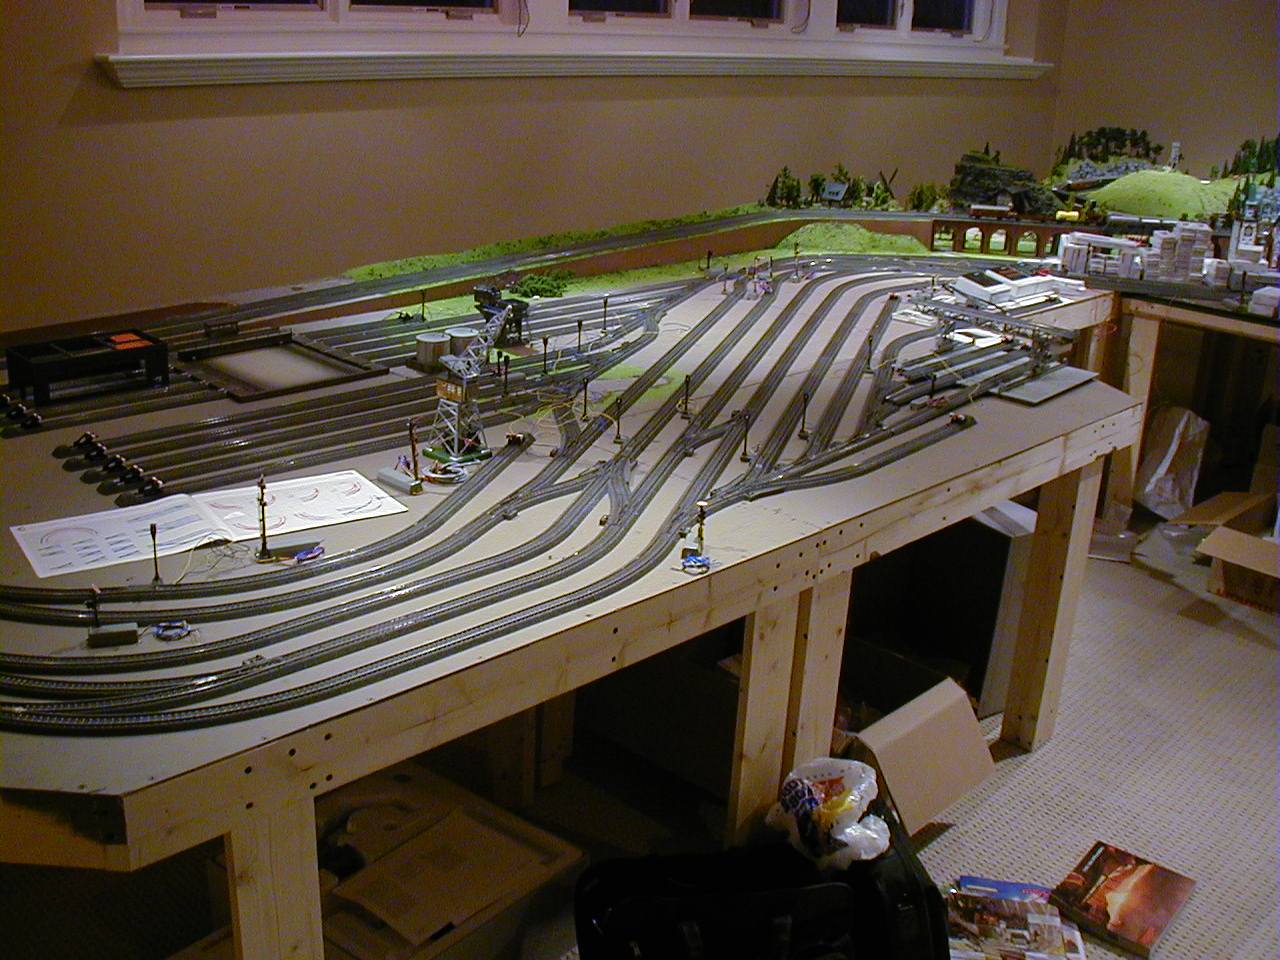 Pin Kato N Scale Track Plans Software on Pinterest